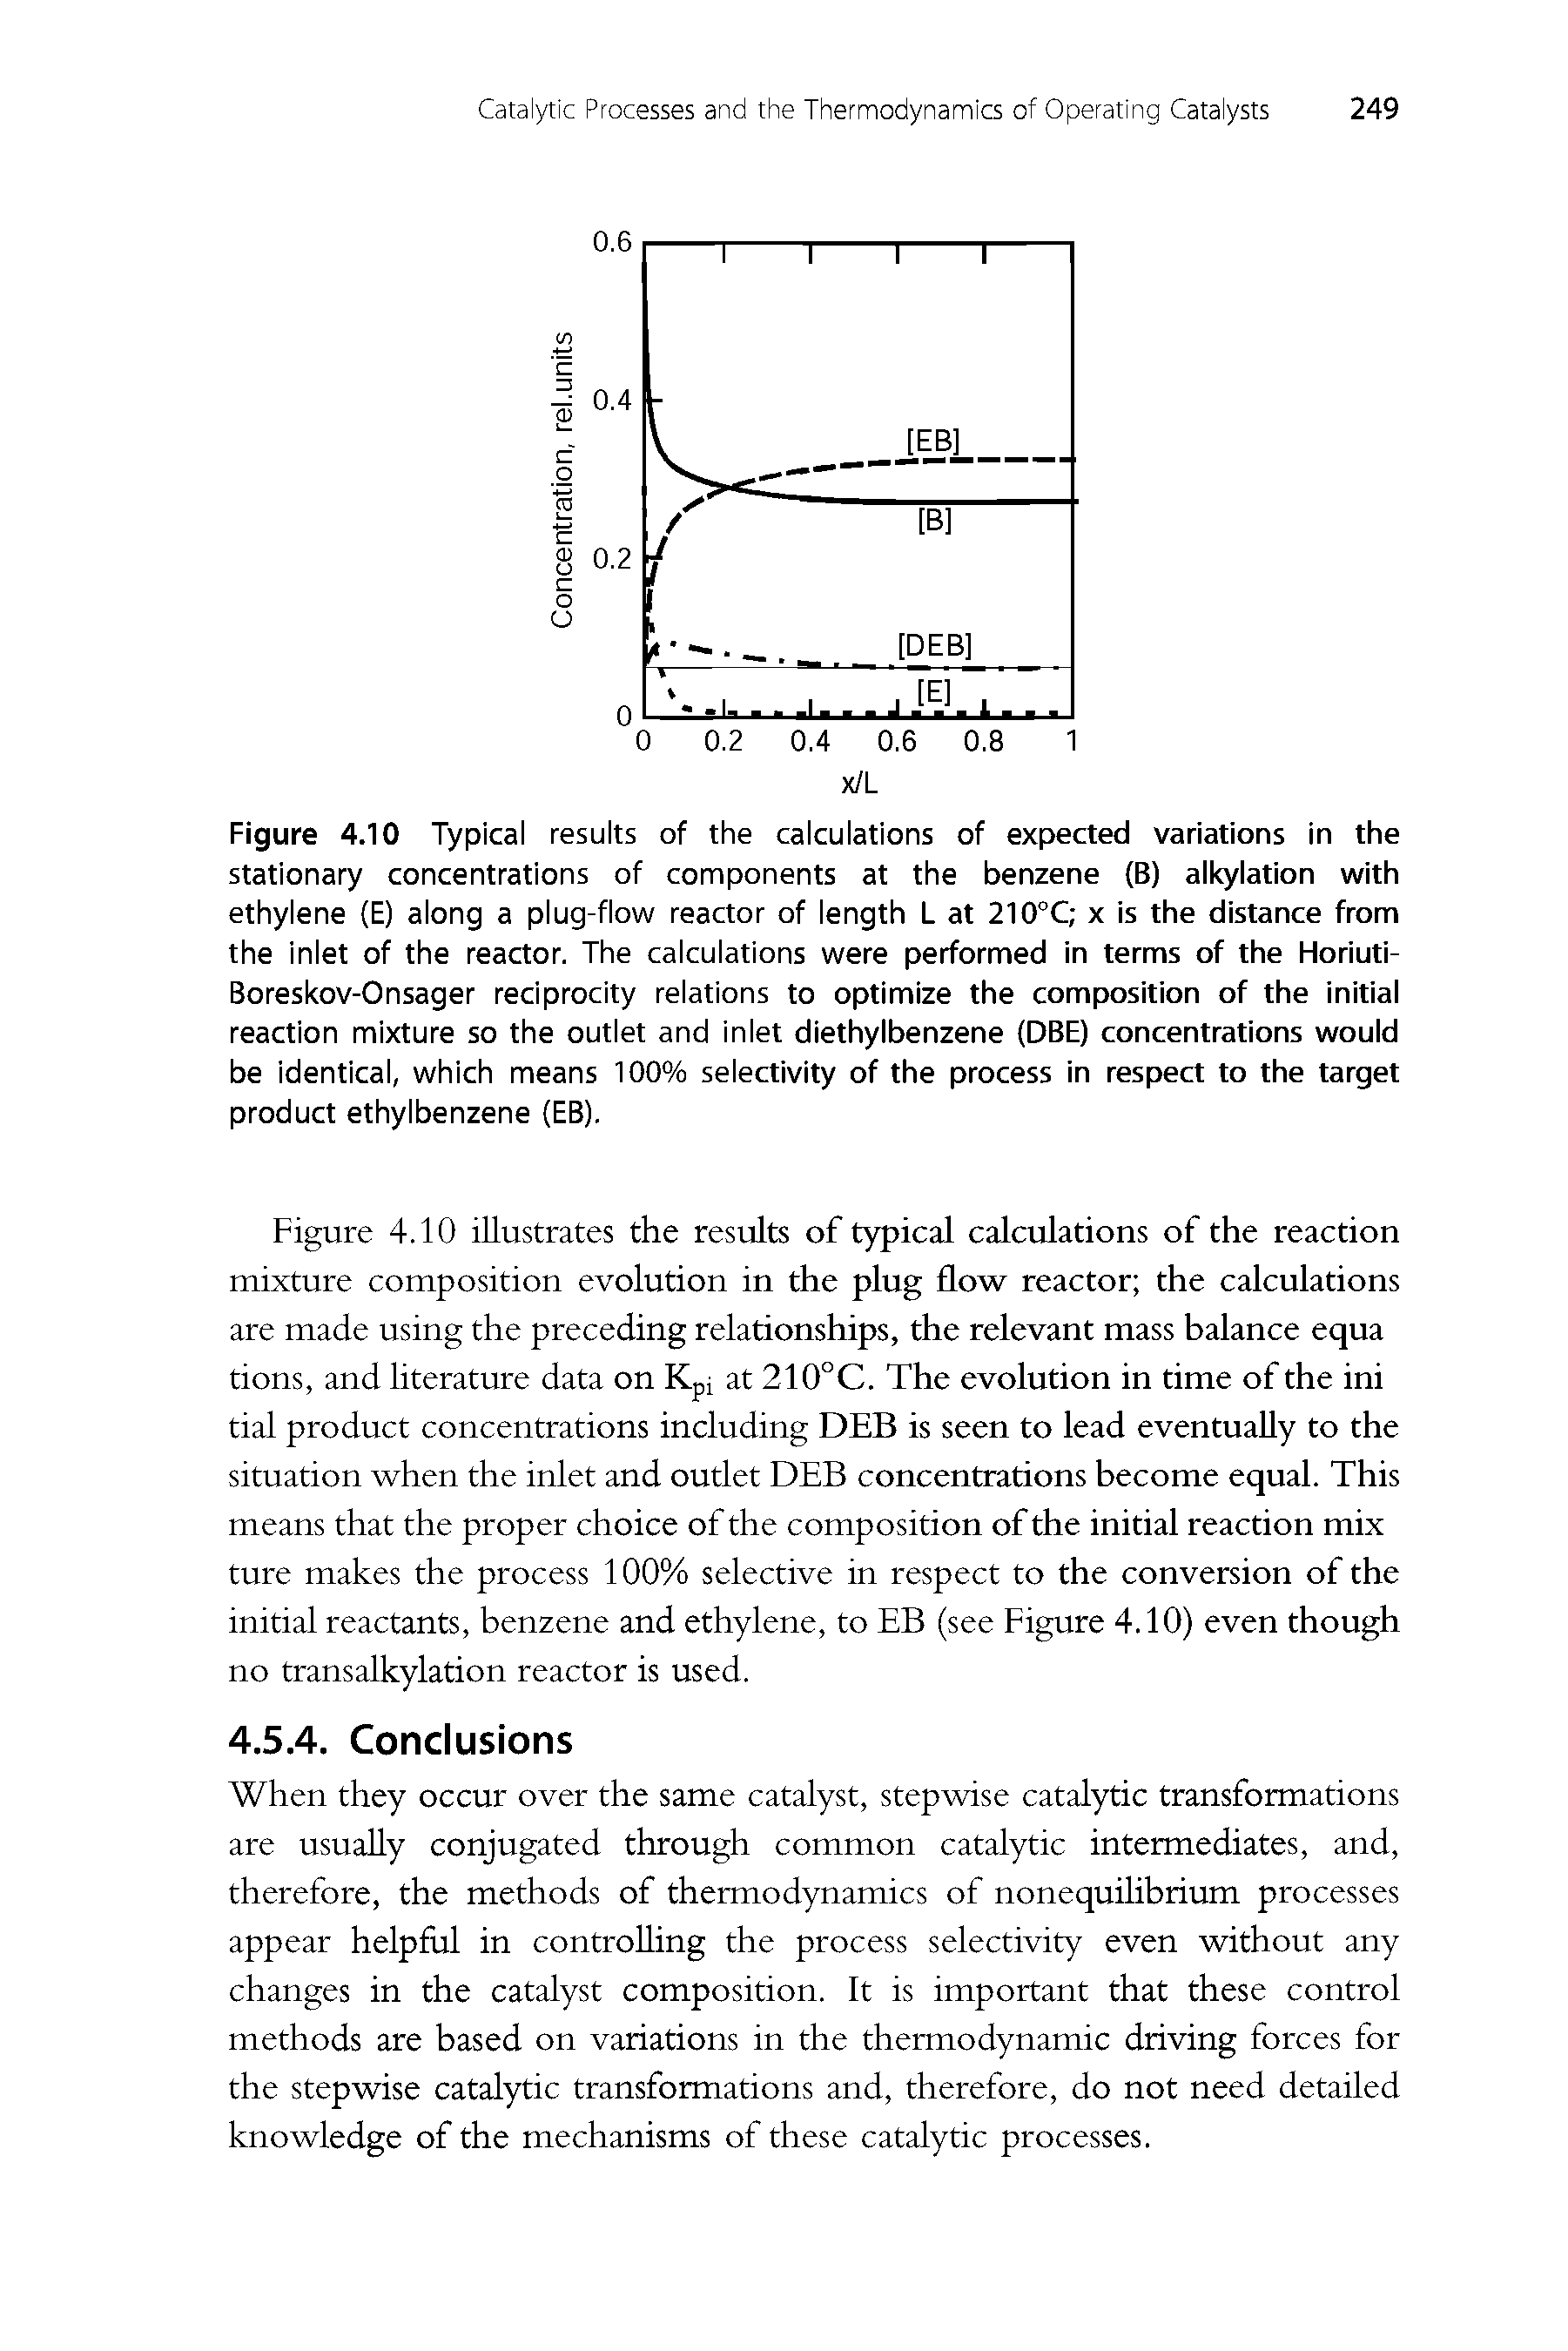 Figure 4.10 Typical results of the calculations of expected variations in the stationary concentrations of components at the benzene (B) alkylation with ethylene (E) along a plug-flow reactor of length L at 210 C x is the distance from the inlet of the reactor. The calculations were performed in terms of the Horiuti-Boreskov-Onsager reciprocity relations to optimize the composition of the initial reaction mixture so the outlet and inlet diethylbenzene (DBE) concentrations would be identical, which means 100% selectivity of the process in respect to the target product ethylbenzene (EB).